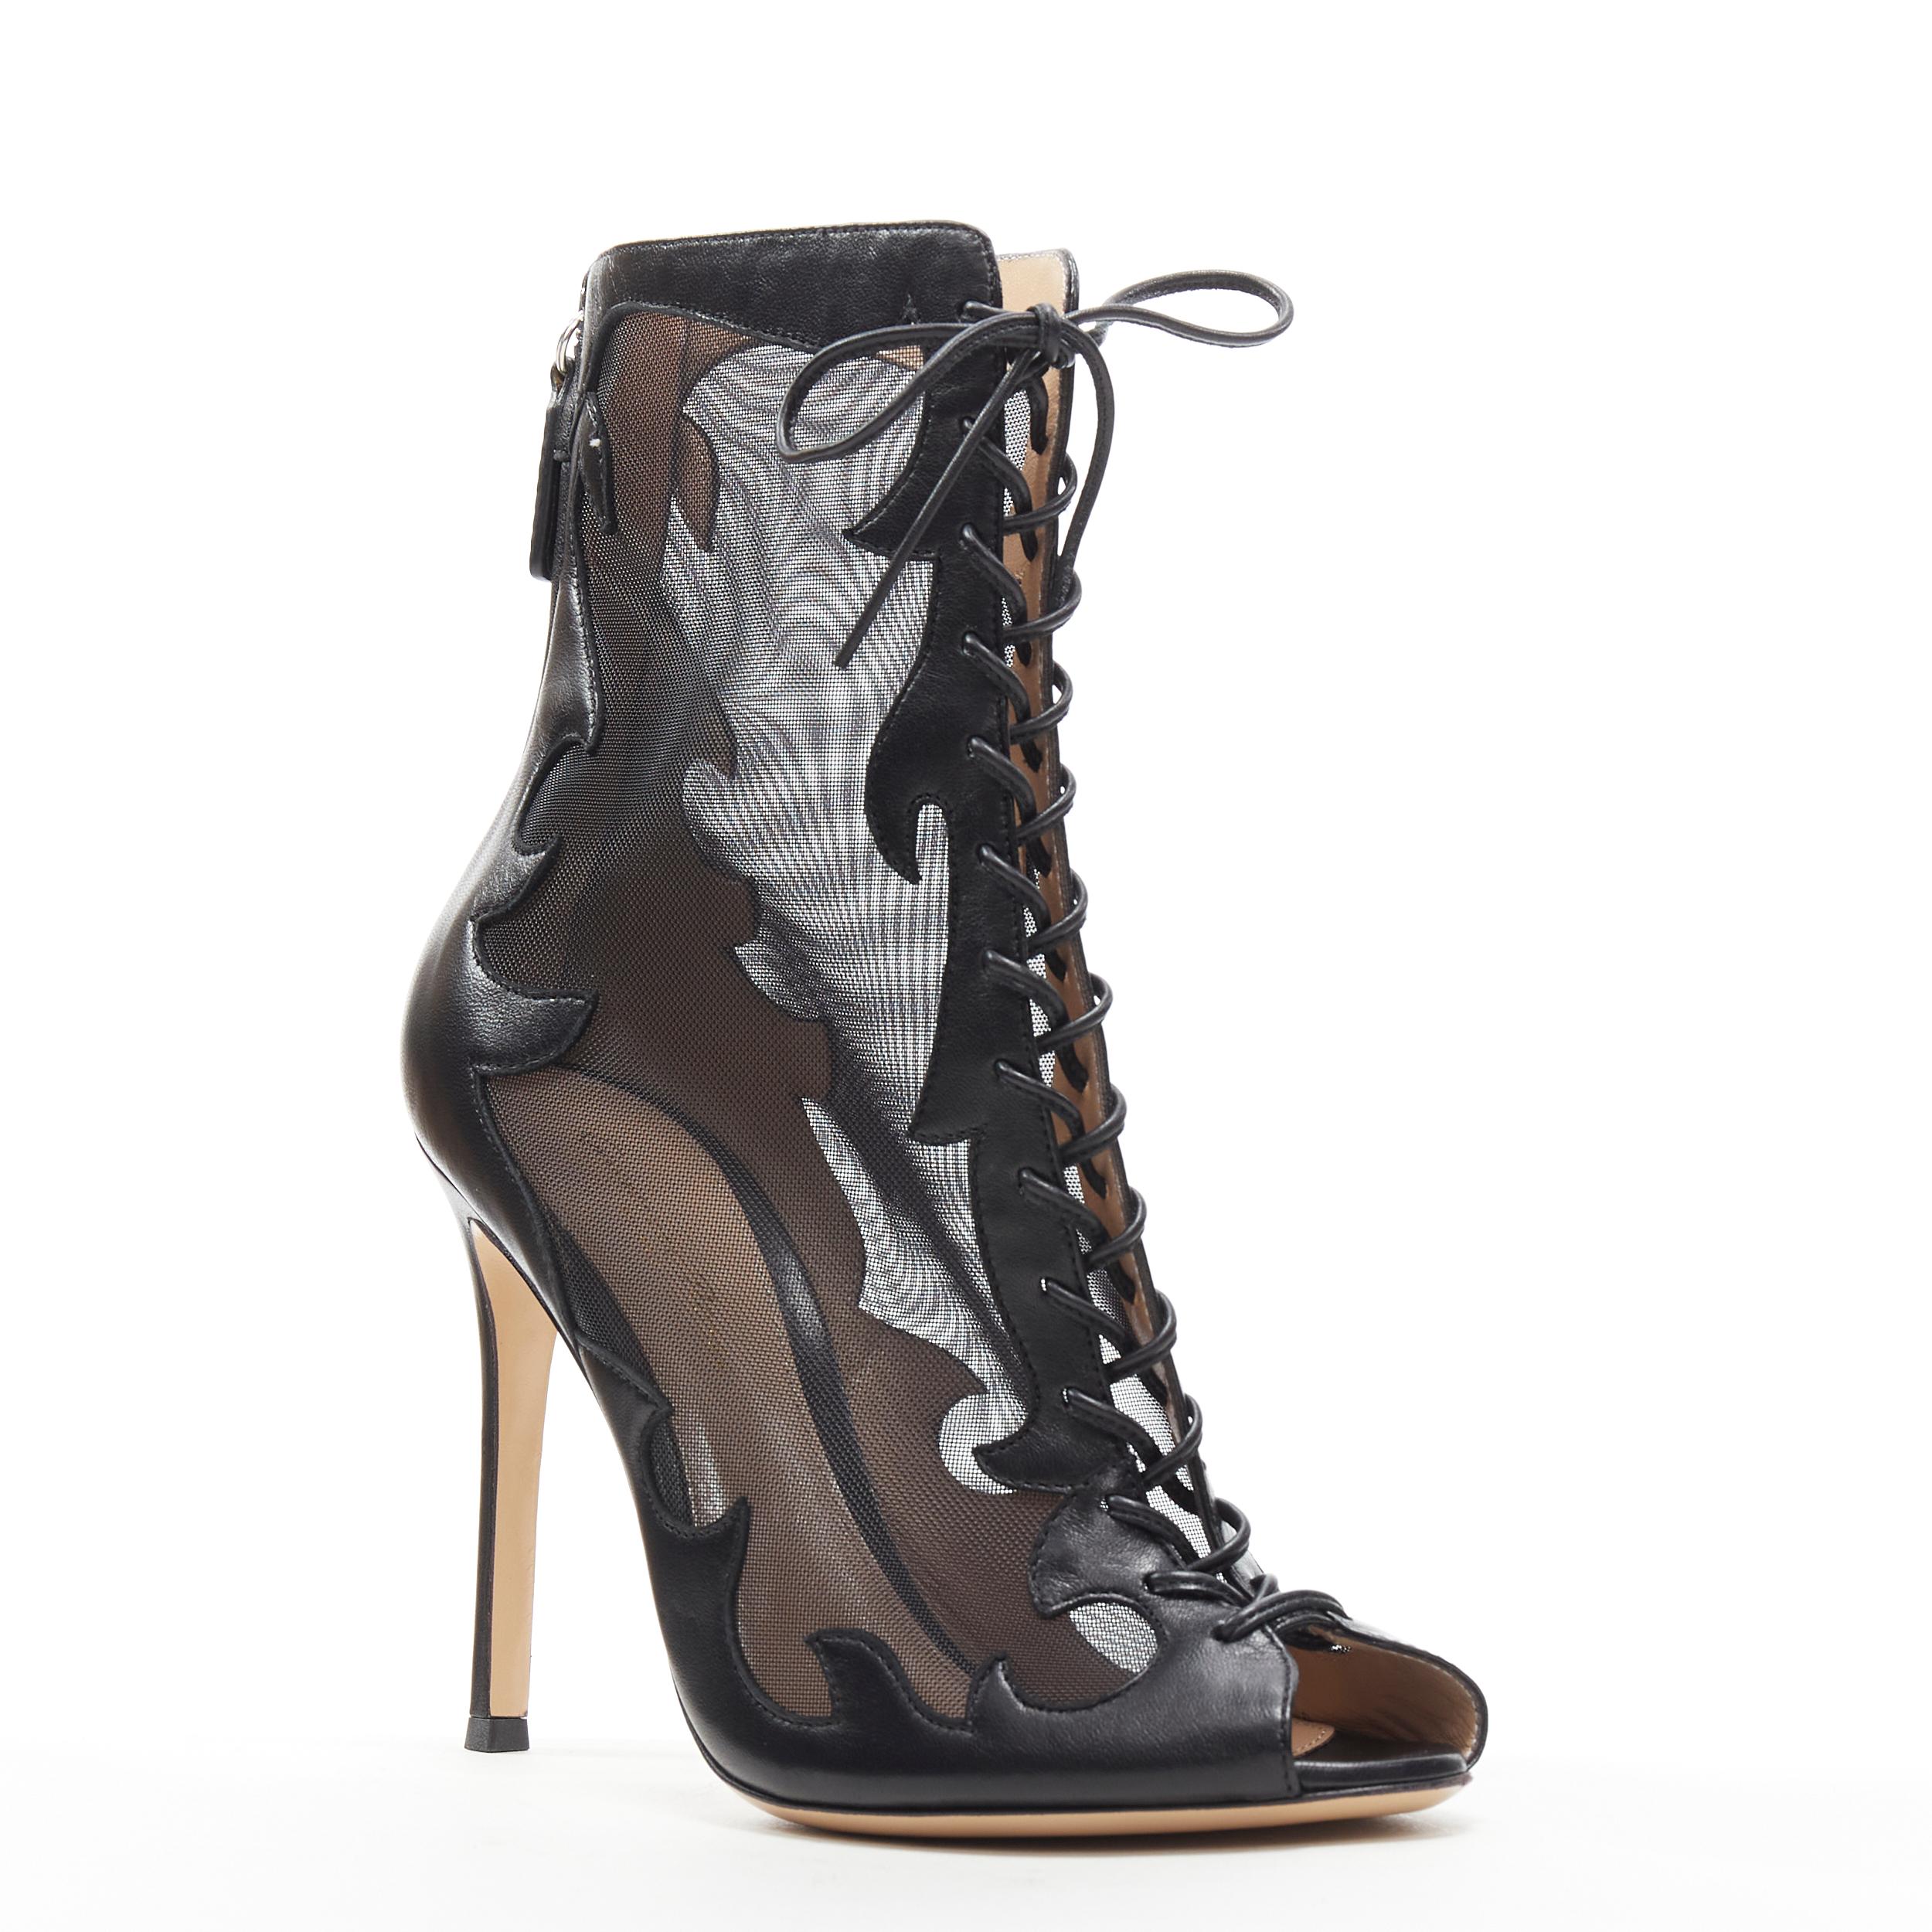 new GIANVITO ROSSI black sheer flame leather peep toe lace up ankle bootie EU38 
Reference: LNKO/A01787 
Brand: Gianvito Rossi 
Designer: Gianvito Rossi 
Material: Leather 
Color: Black 
Pattern: Solid 
Closure: Zip Extra Detail: Flame cut out.